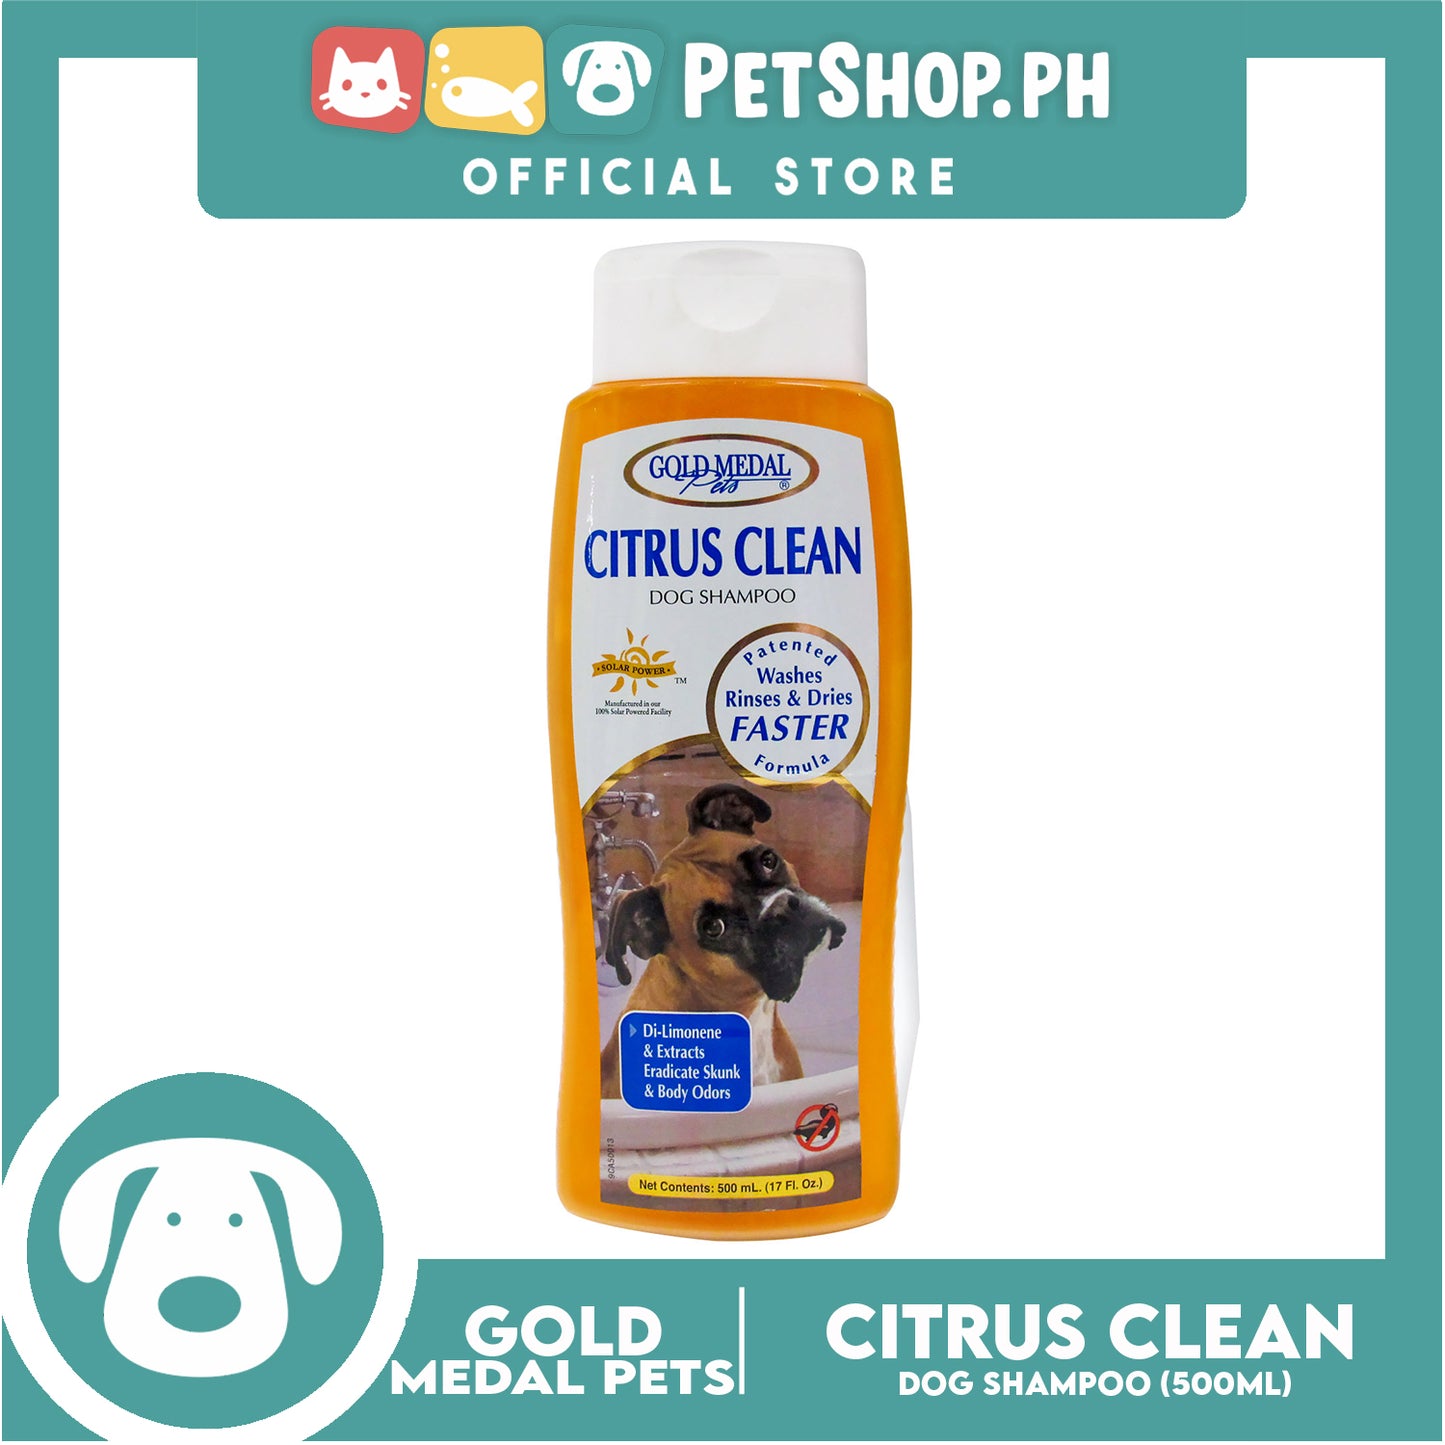 Gold Medal Pets Citrus Clean Dog Shampoo 17oz Di-Limonene and Extracts, Eradicate Skunk and Body Odors